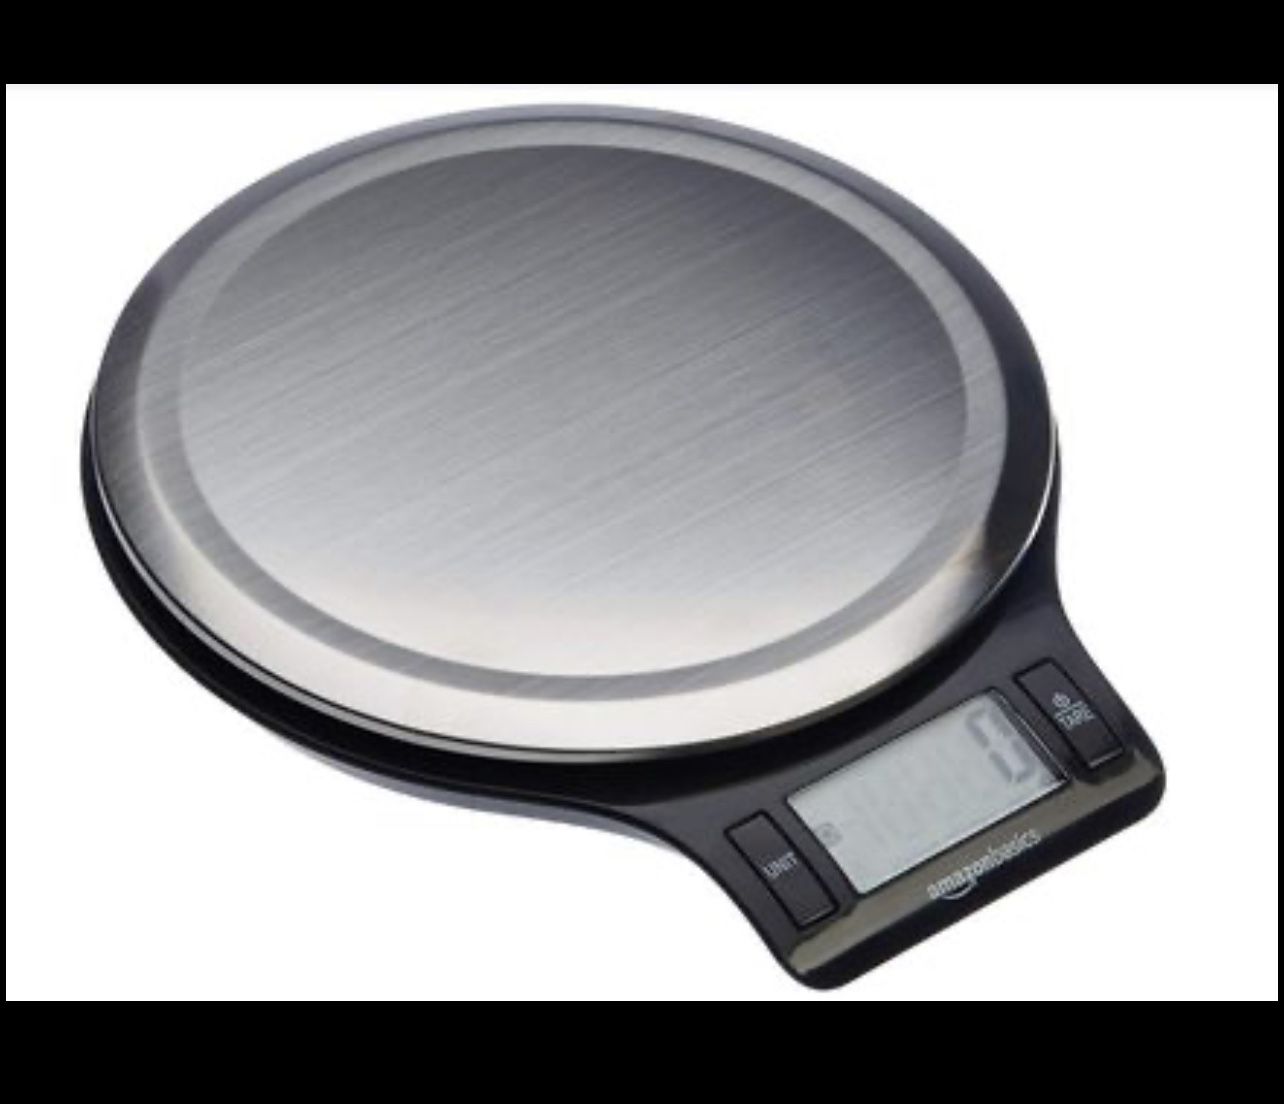 Amazon Basics Stainless Steel Digital Kitchen Food Scale with LCD Display, up to 11 pounds